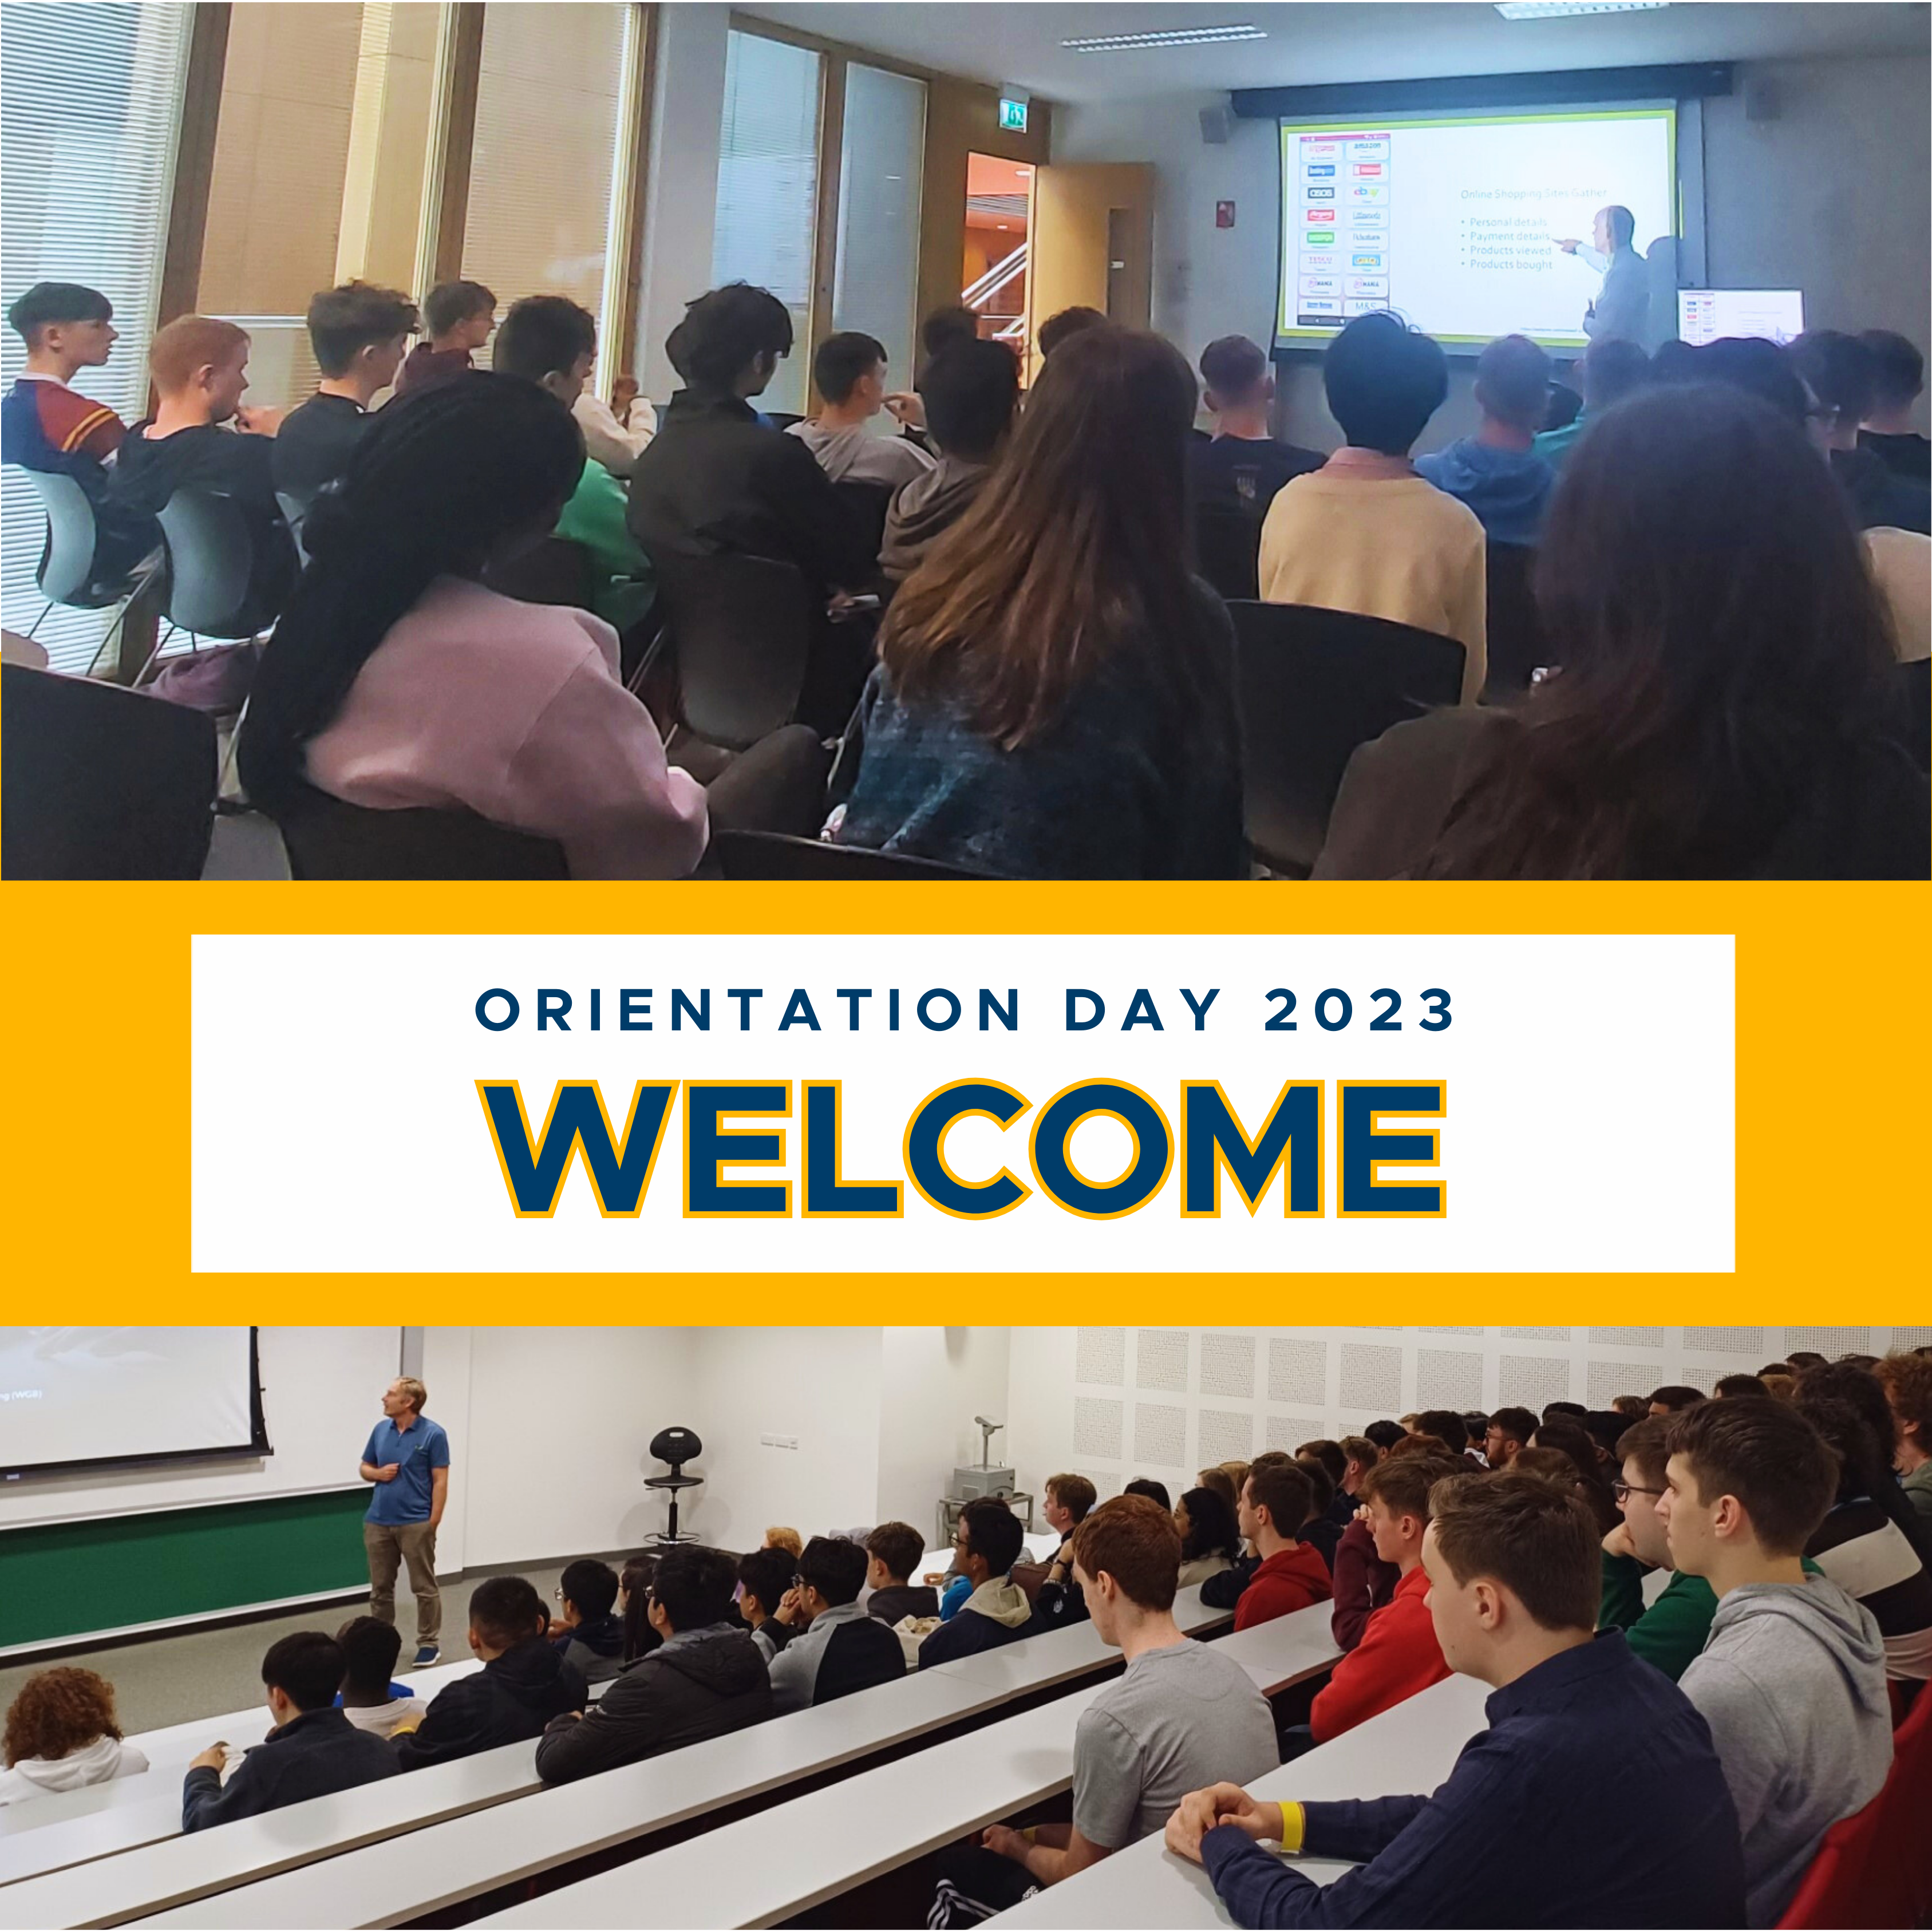 Welcome to Orientation Day 2023 - Computer Science and Data Science & Analytics students!